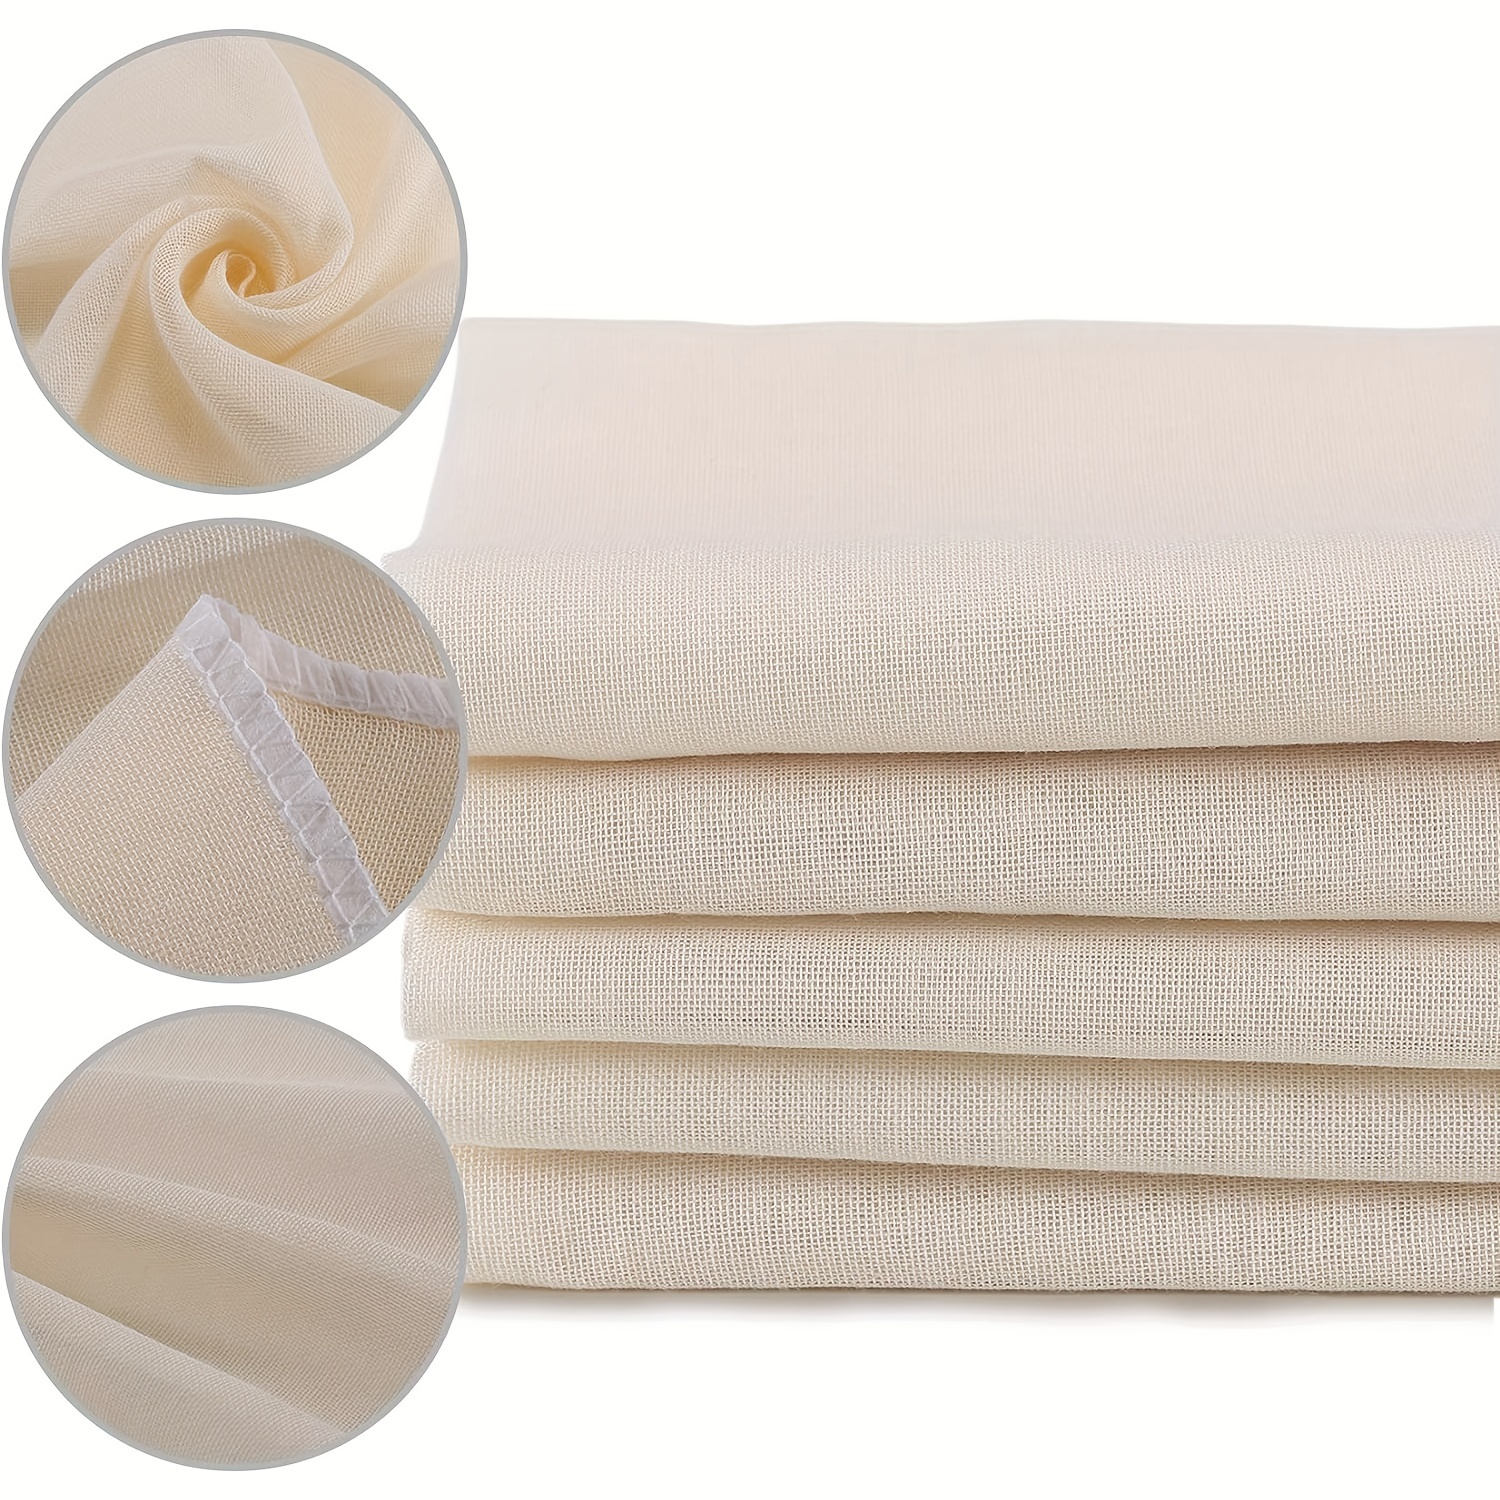 Olicity Cheesecloth, Grade 90, 20x20Inch, Double-Layer 100% Unbleached Pure  Cotton Muslin Cloth for Straining, Reusable Hemmed Cheese Cloths Filter